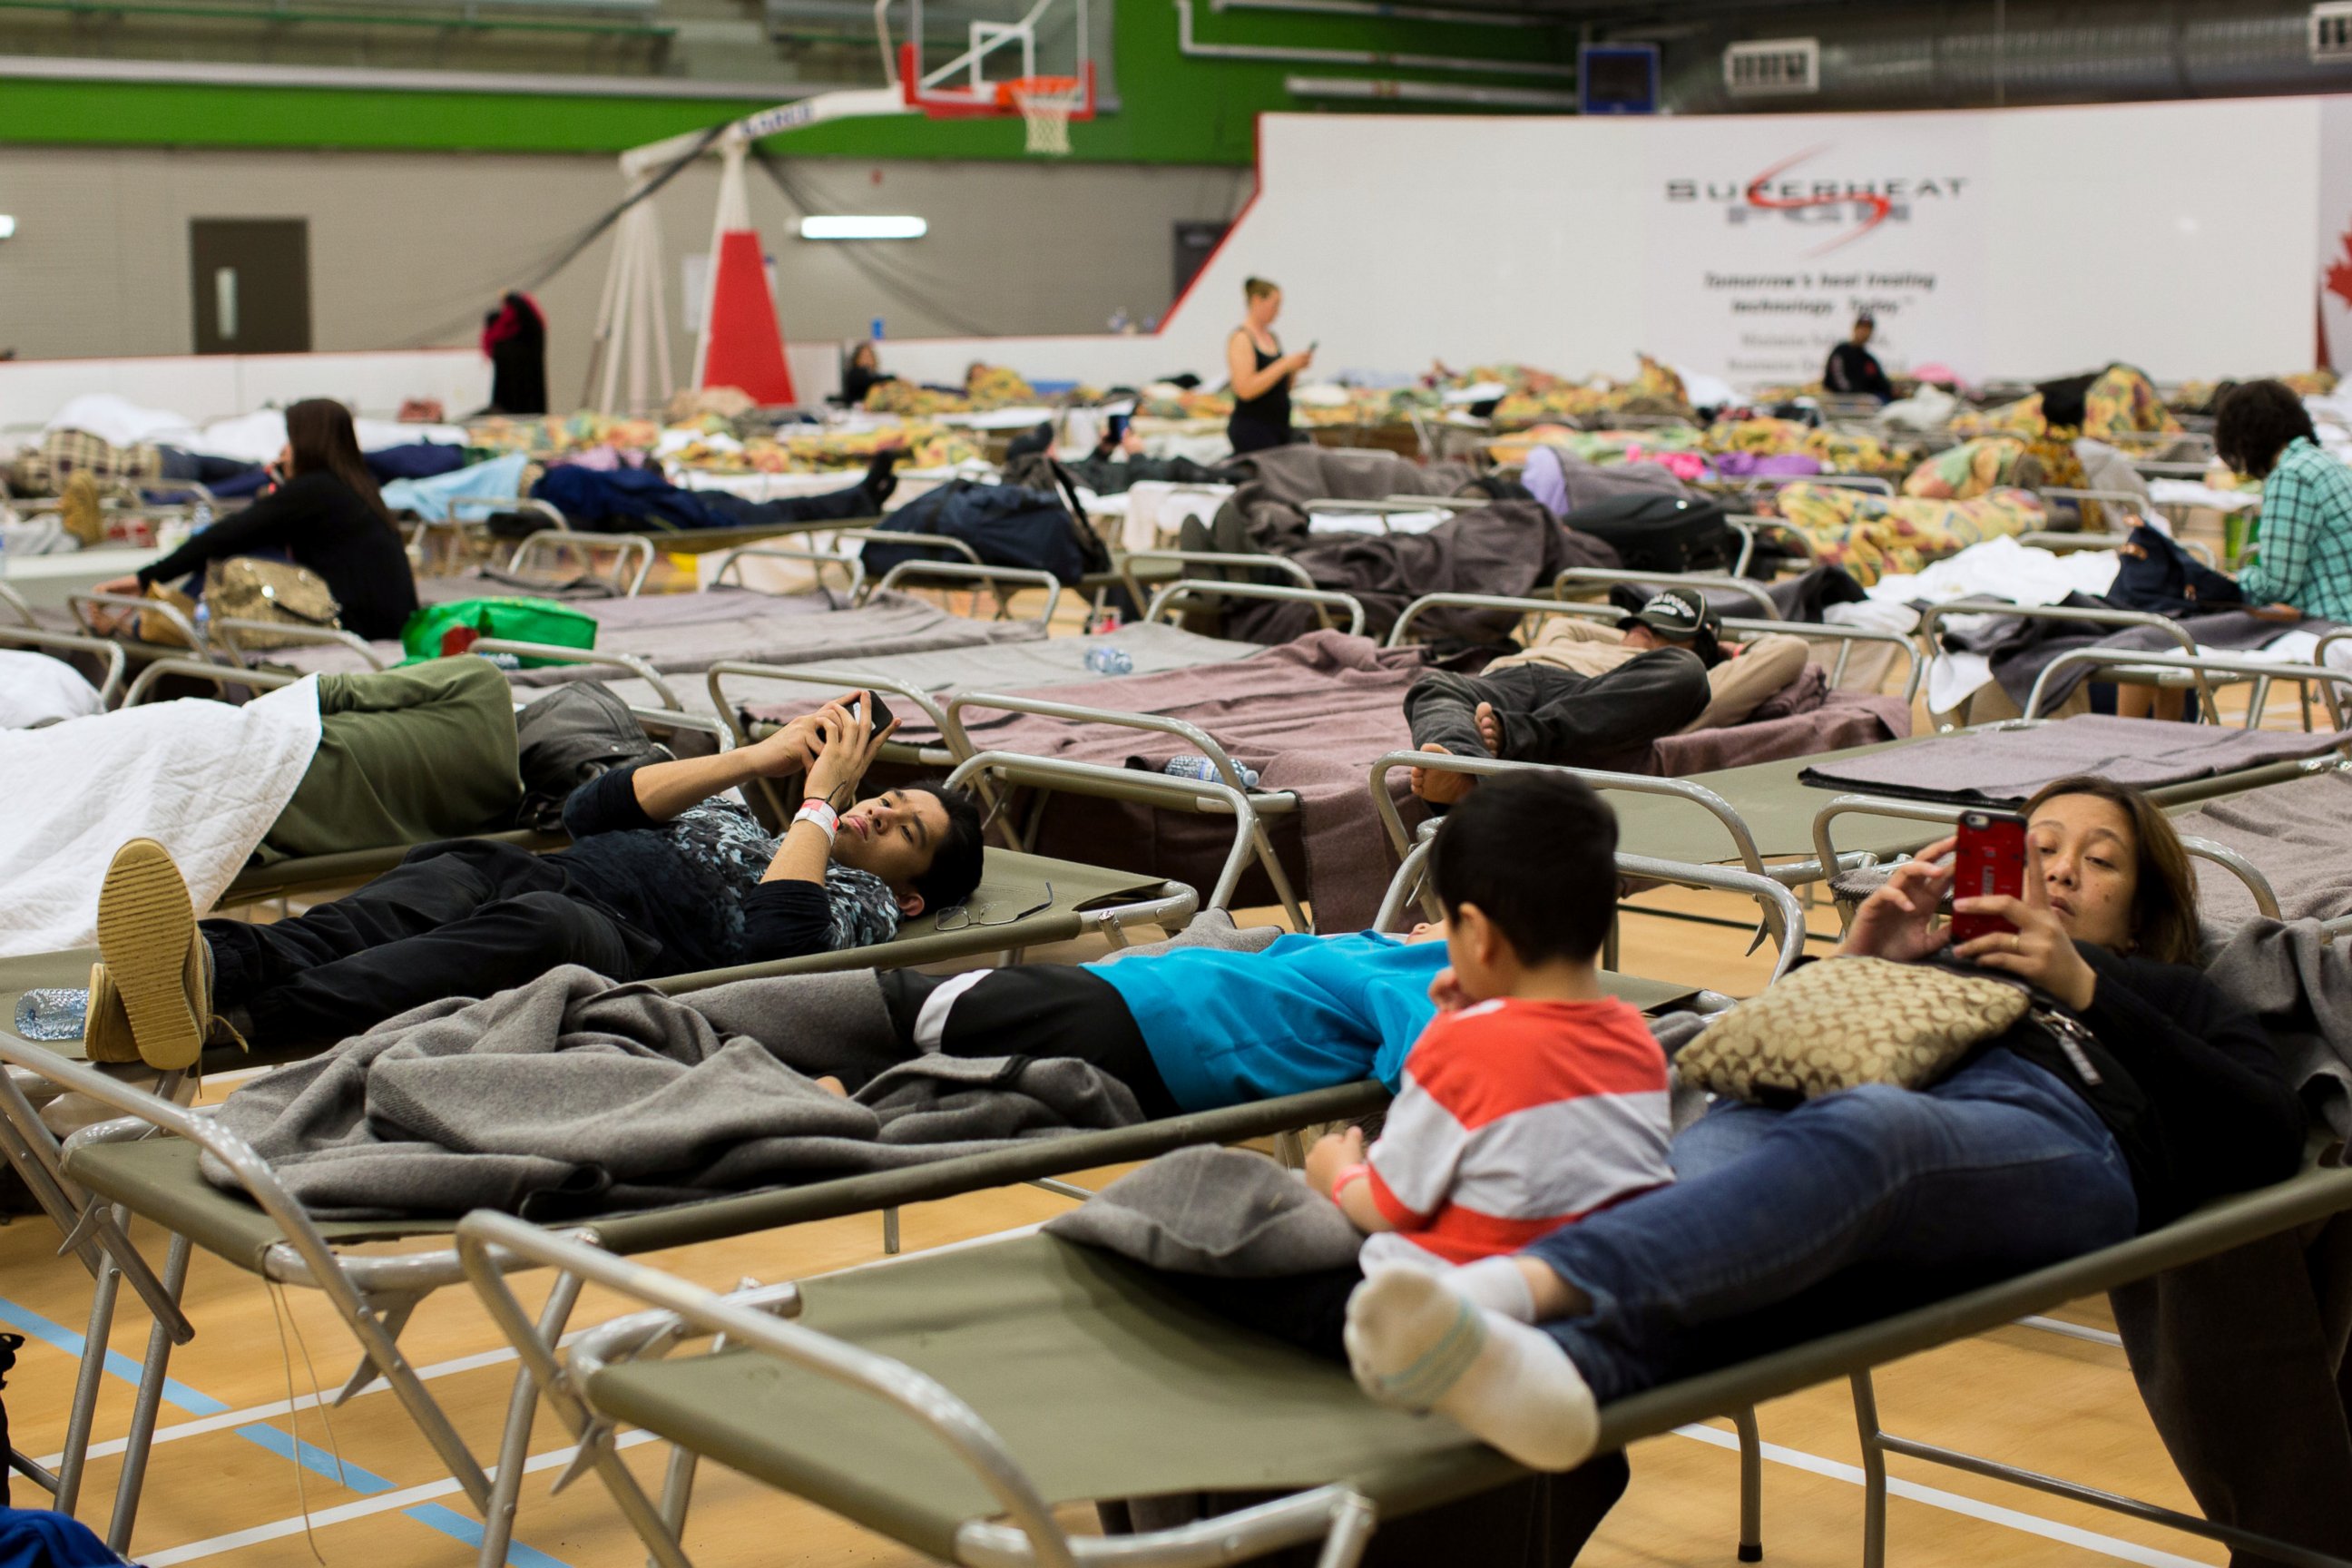 PHOTO: Fort McMurray residents rest at a community centre in Anzac, Alberta, after residents were ordered to be evacuated due to a raging wildfire, May 4, 2016.